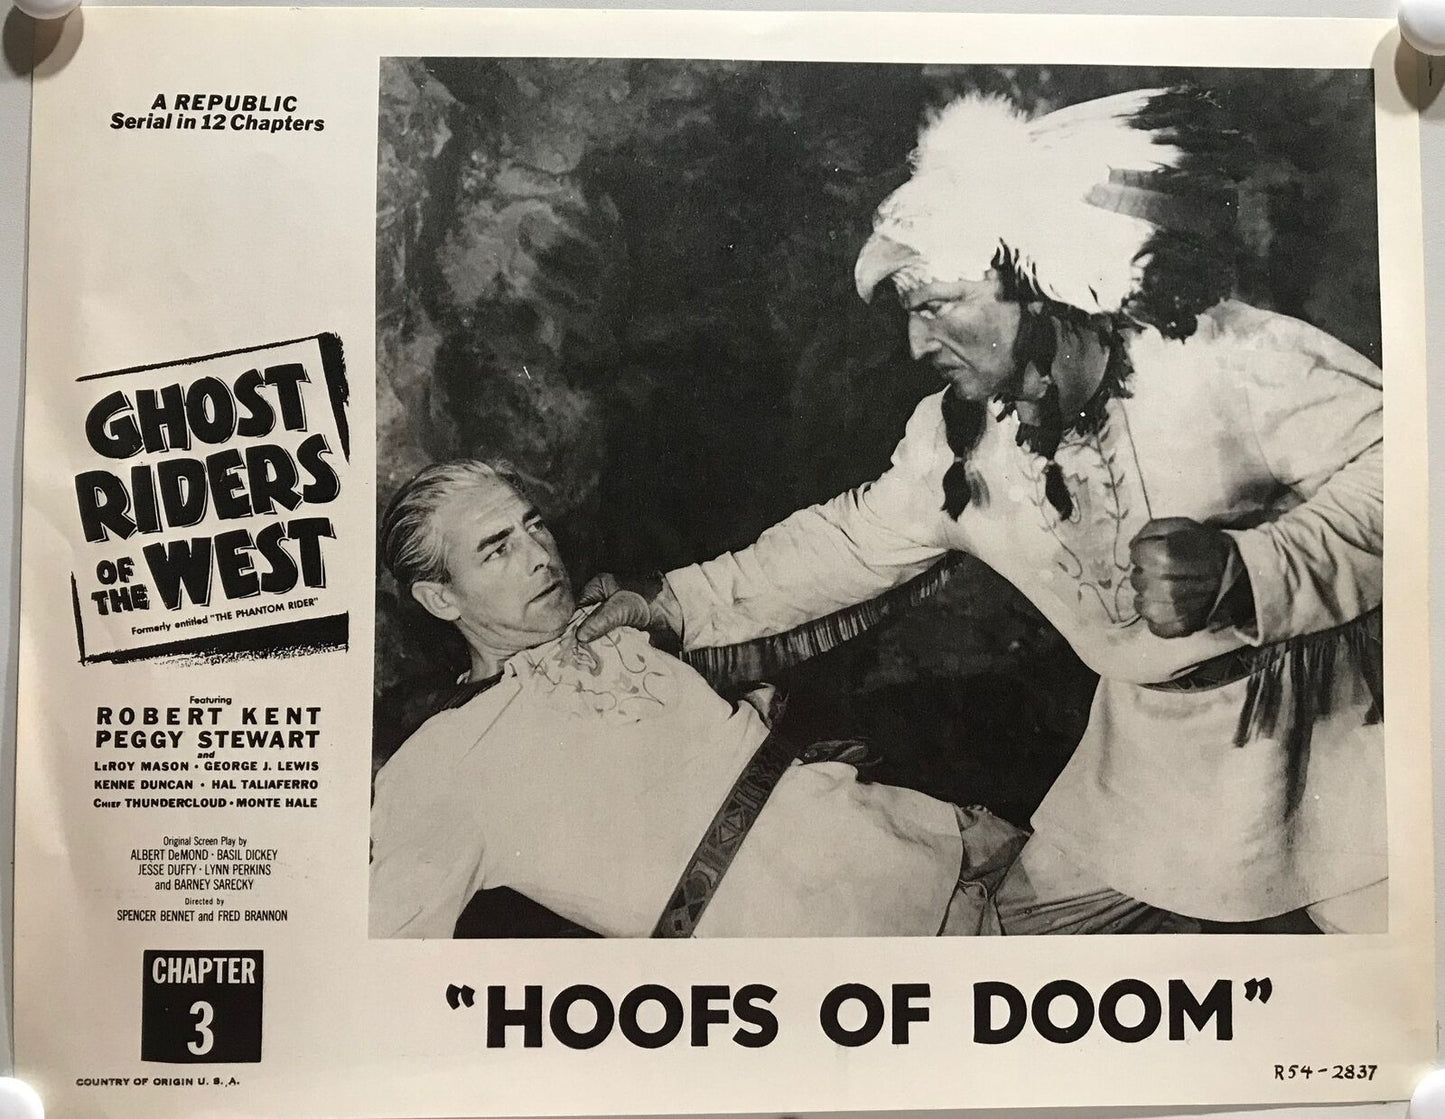 ORIGINAL SERIAL LOBBY CARD - GHOST RIDERS OF THE WEST (a) - R1954 - Ch 3